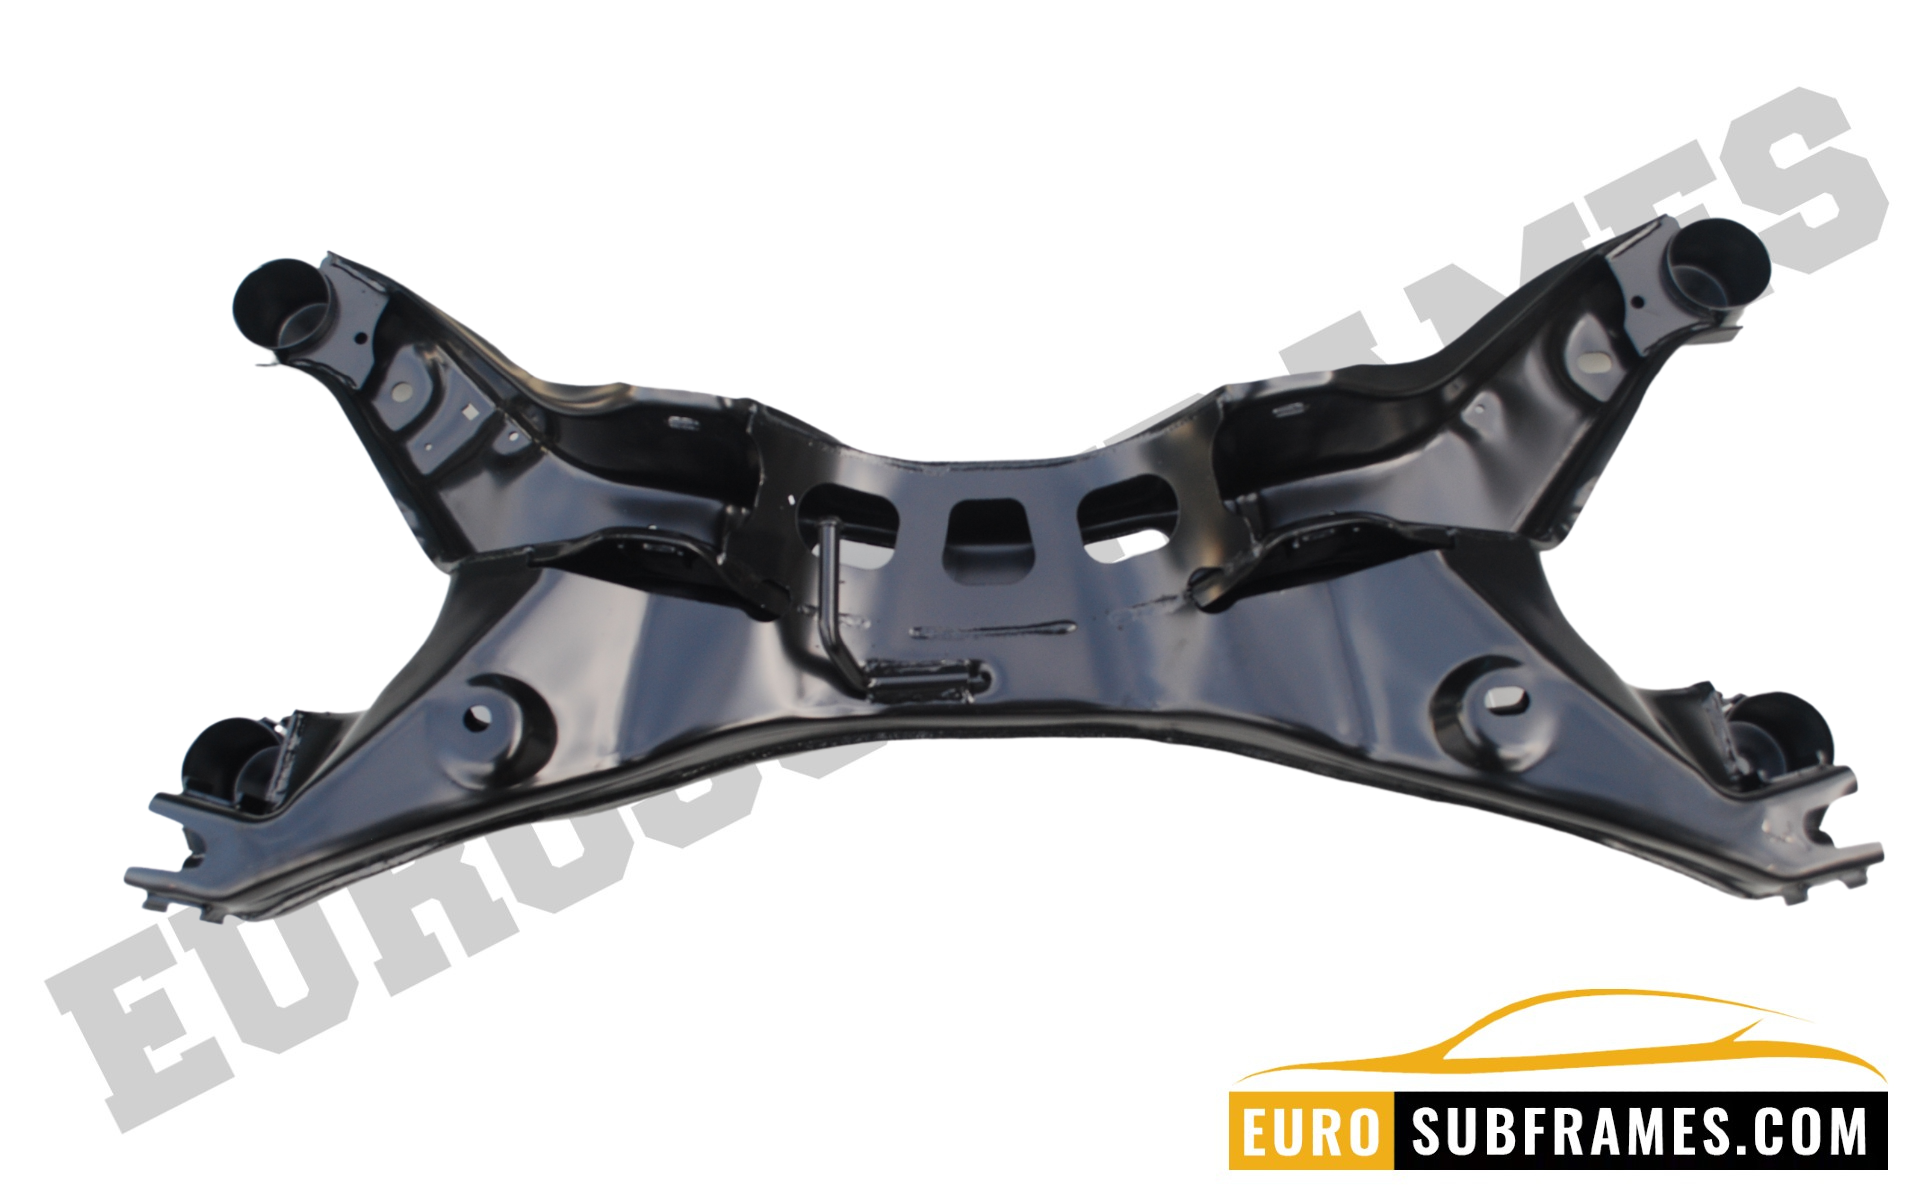 NEW Rear Subframe Crossmember For Vauxhall/Opel Vectra C 02-2010/Signum 03-2008